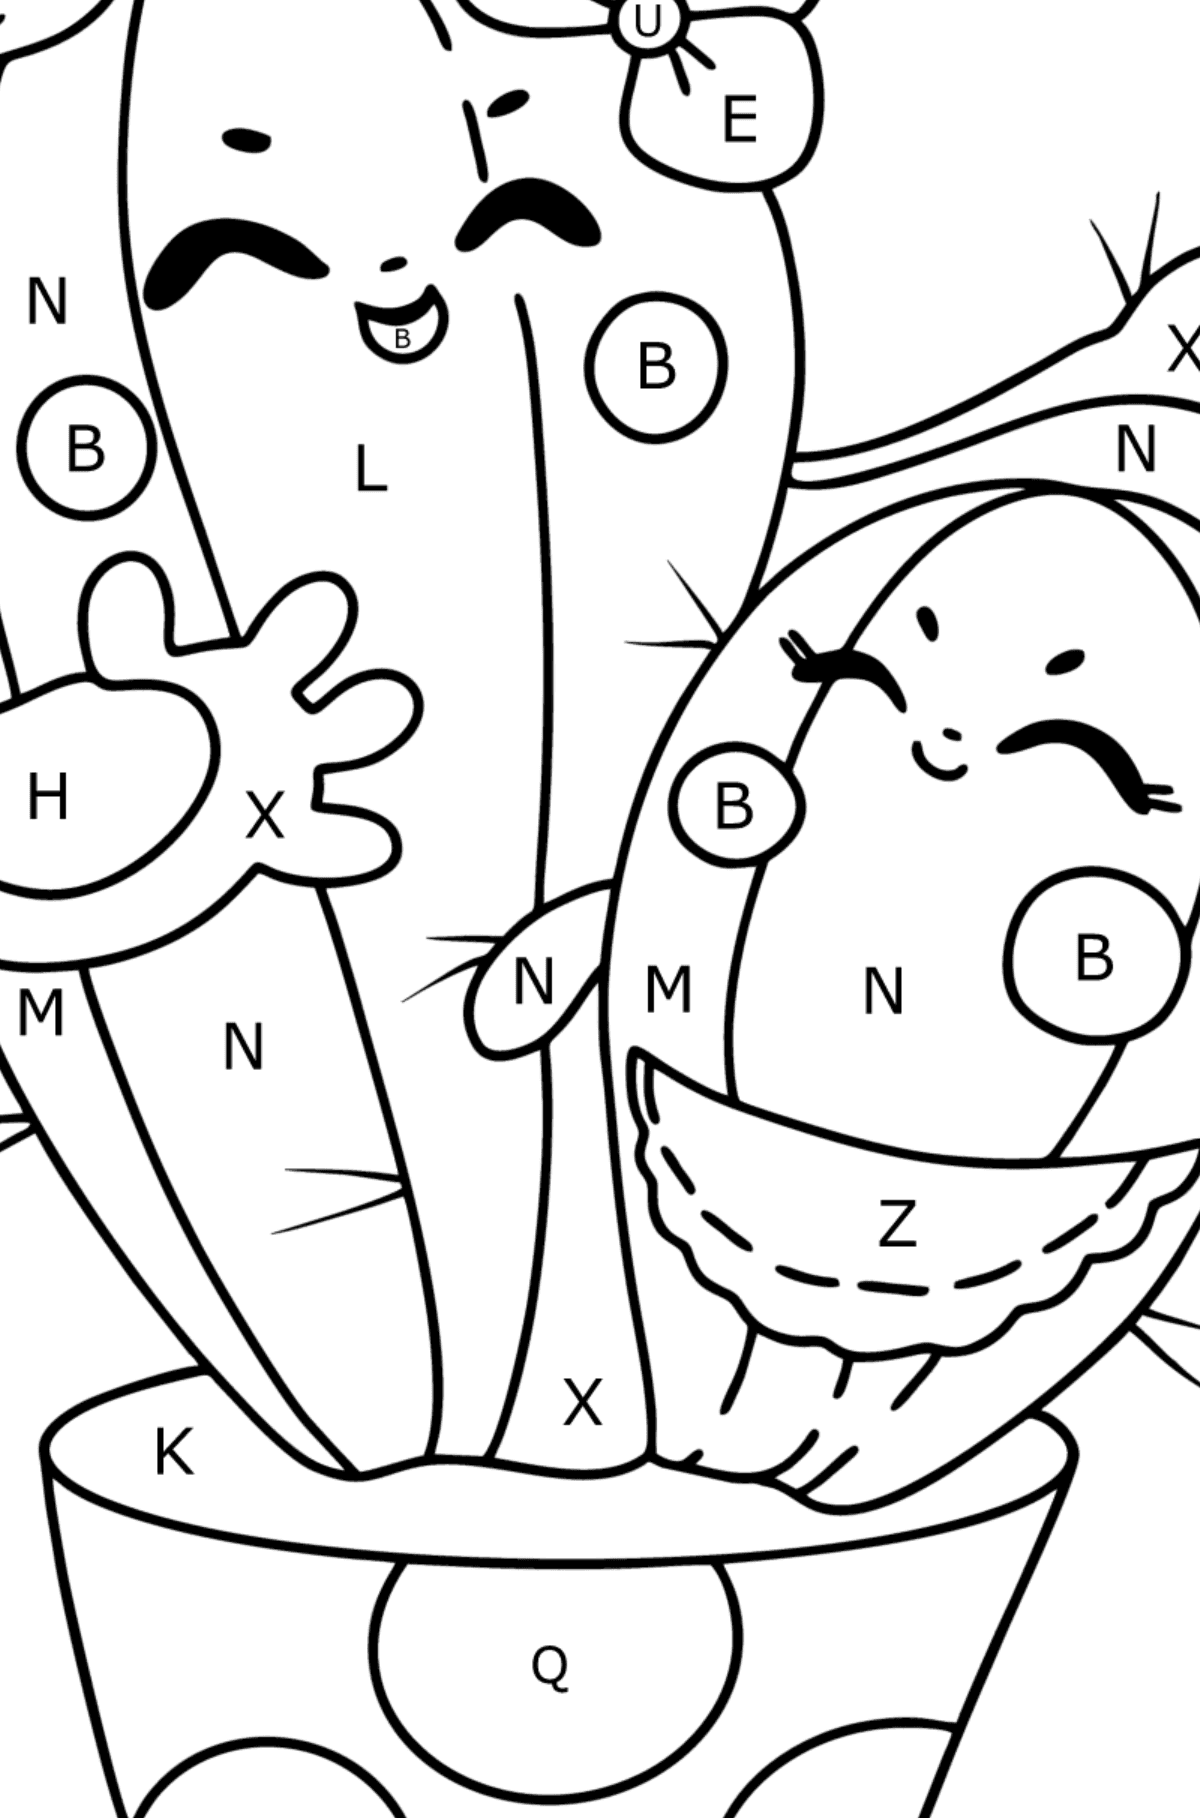 Cartoon Cactus coloring page - Coloring by Letters for Kids